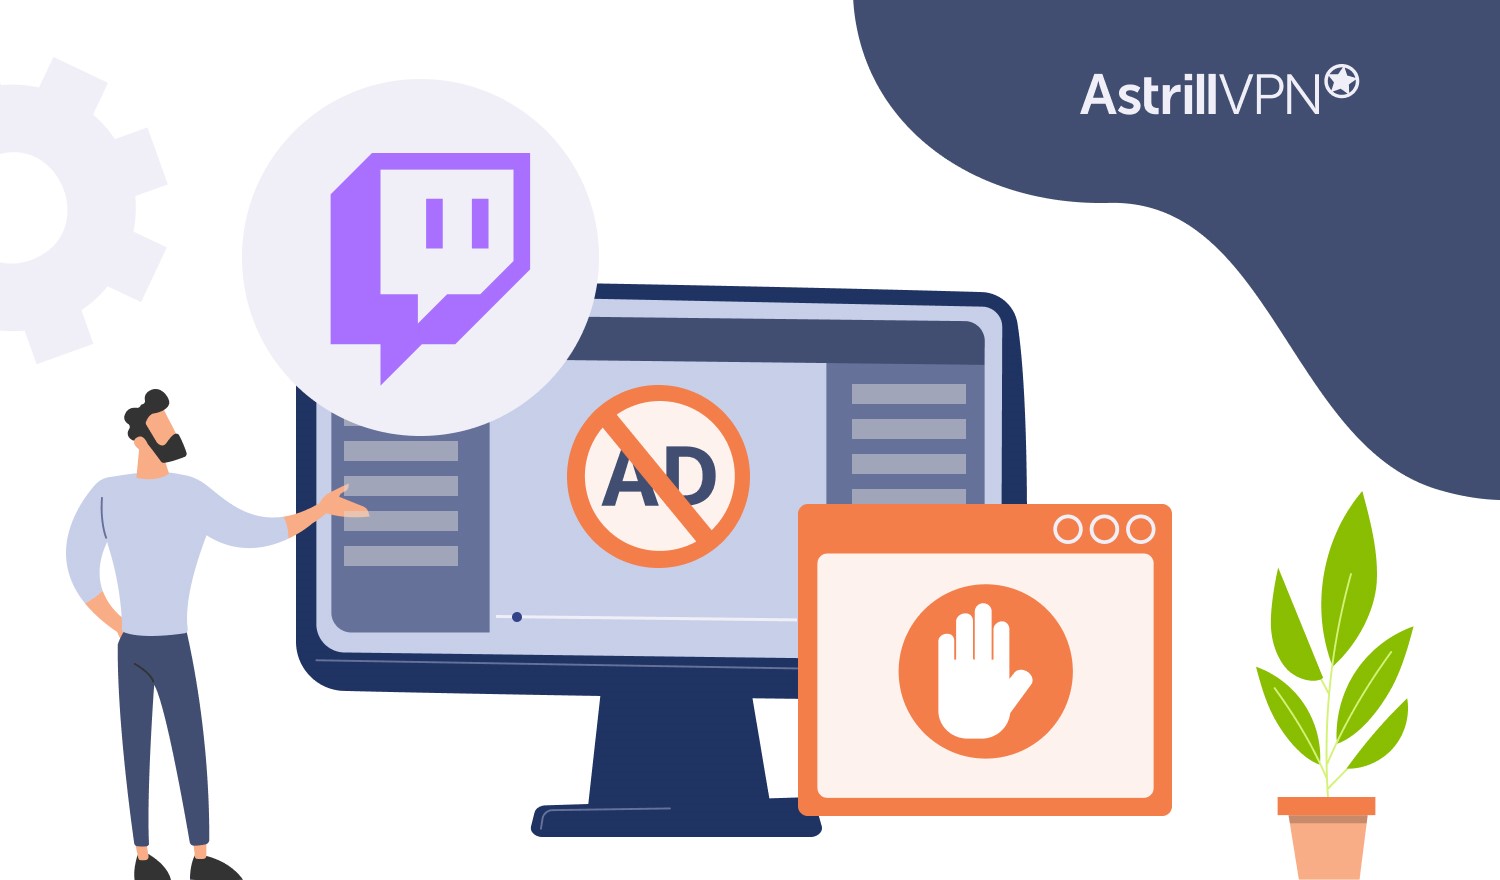 How to Block Twitch Ads - Tried and Tested Methods